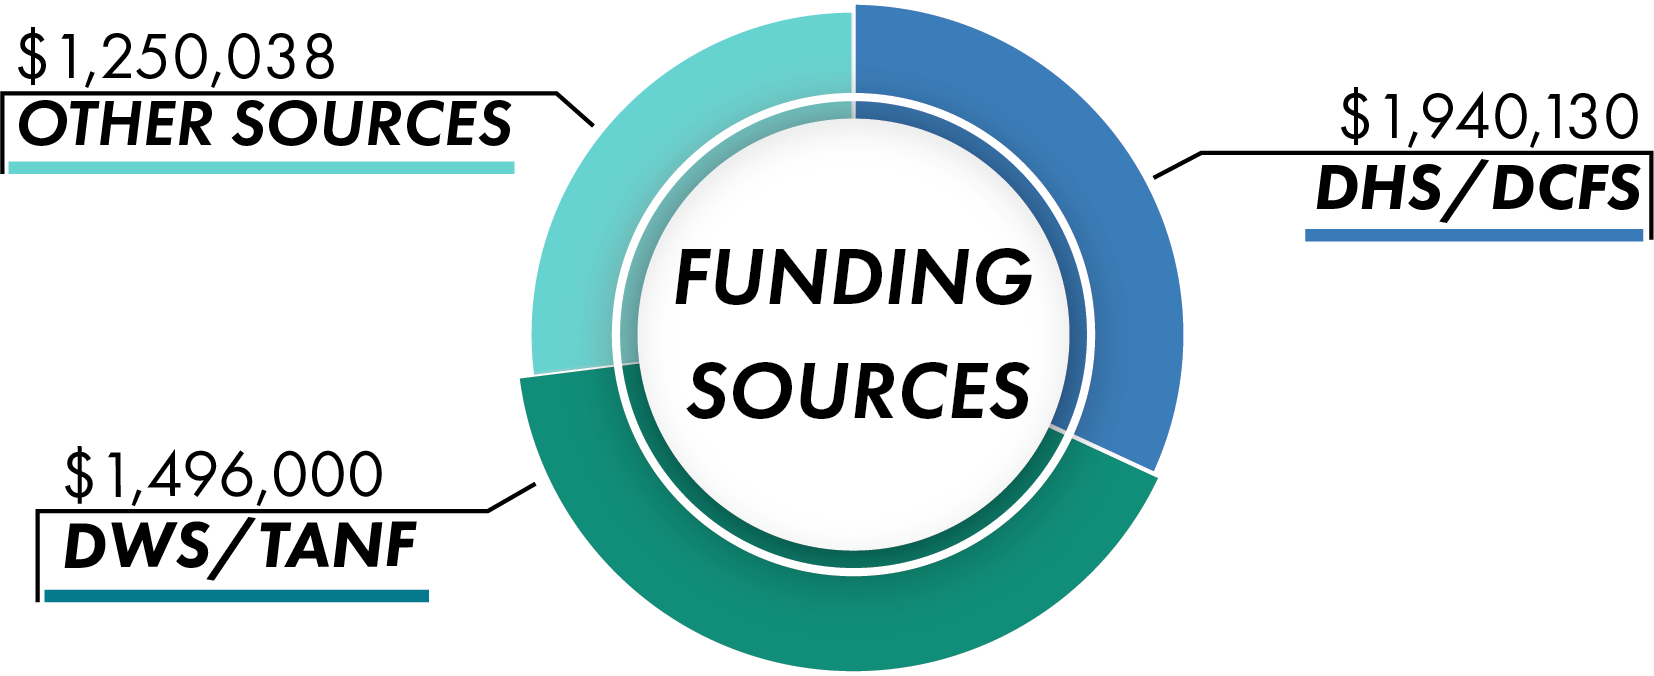 UAFSC FUNDING SOURCES